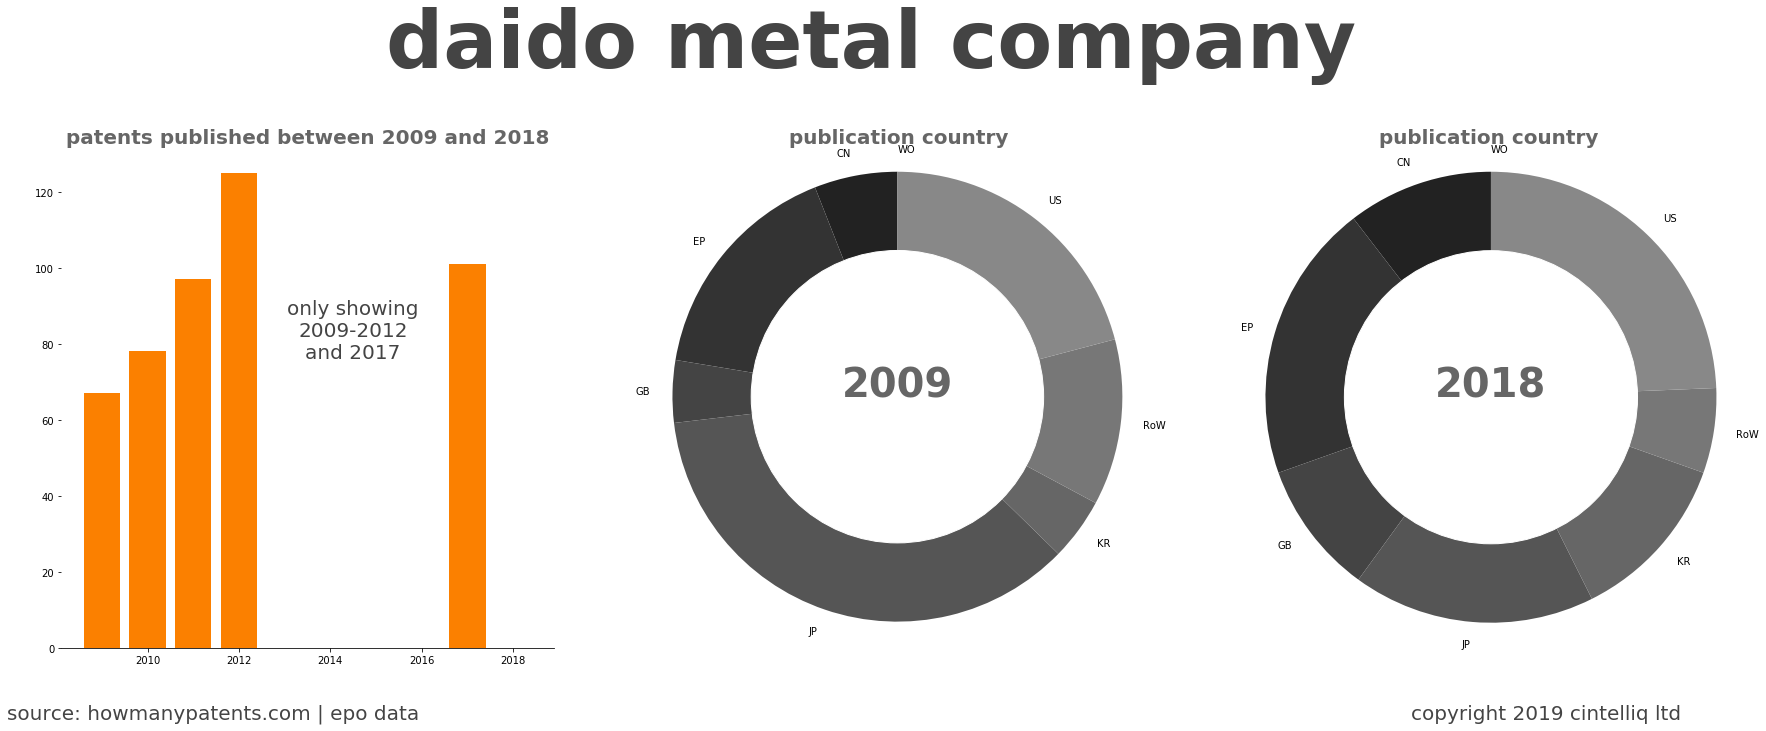 summary of patents for Daido Metal Company